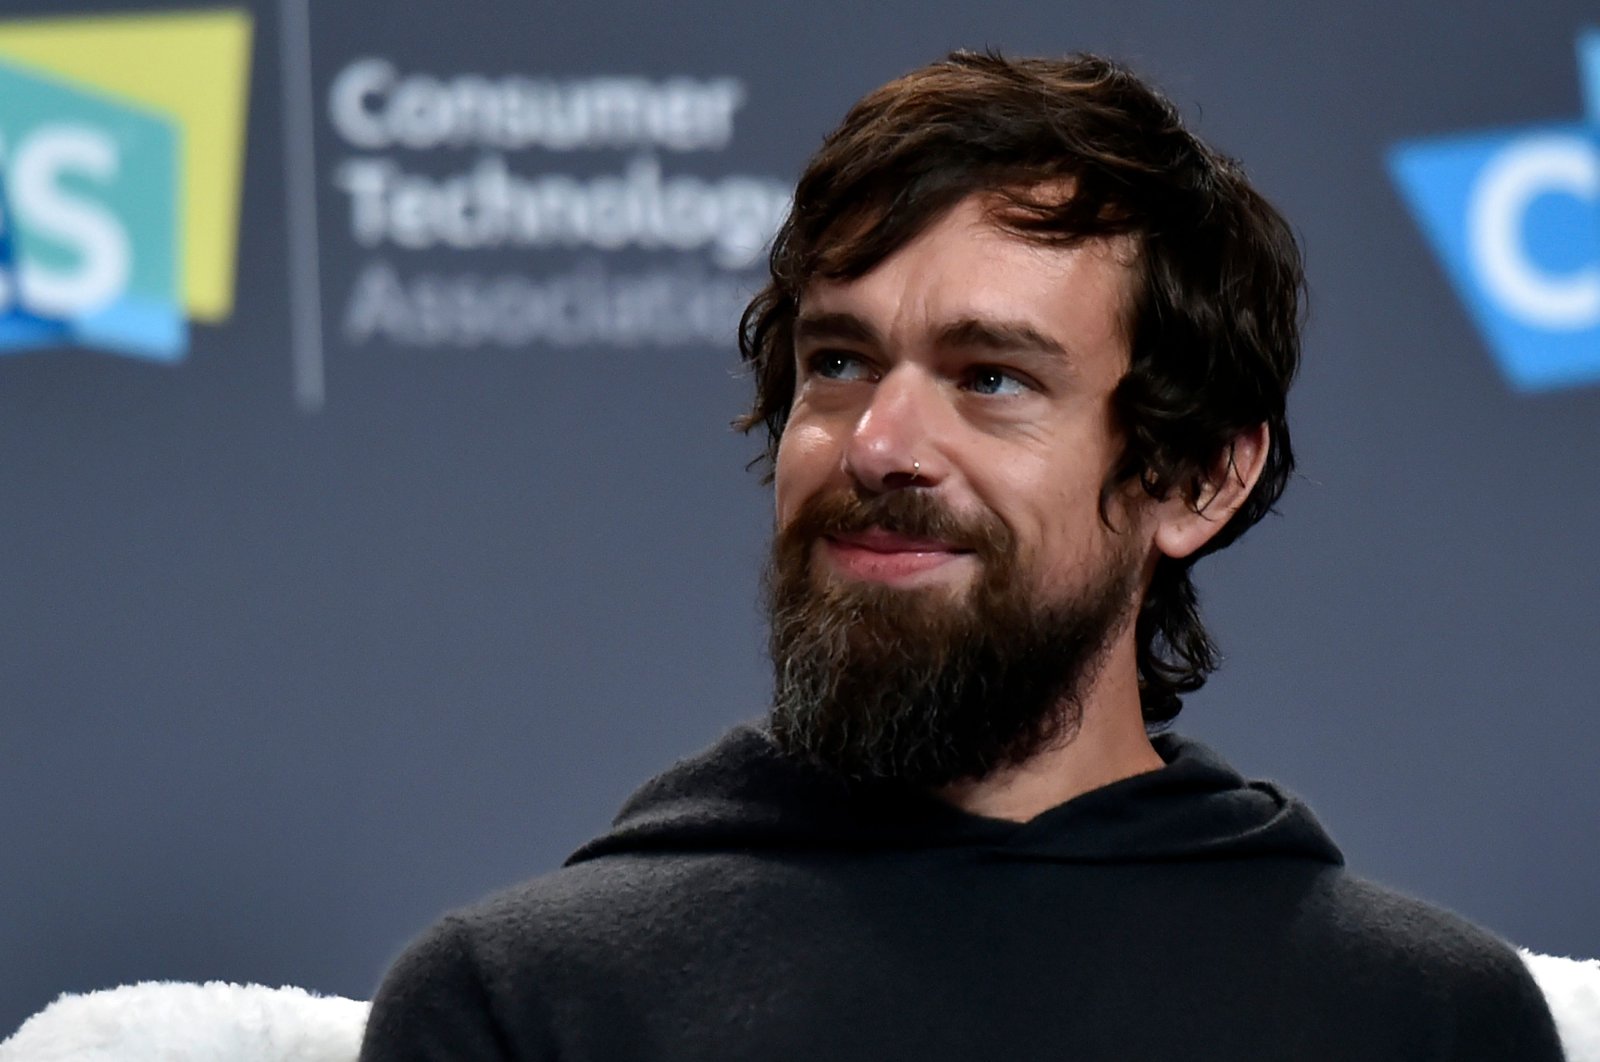 Twitter CEO Jack Dorsey speaks during a press event at CES 2019, in Las Vegas, Nevada, Jan. 9, 2019. (AFP Photo)